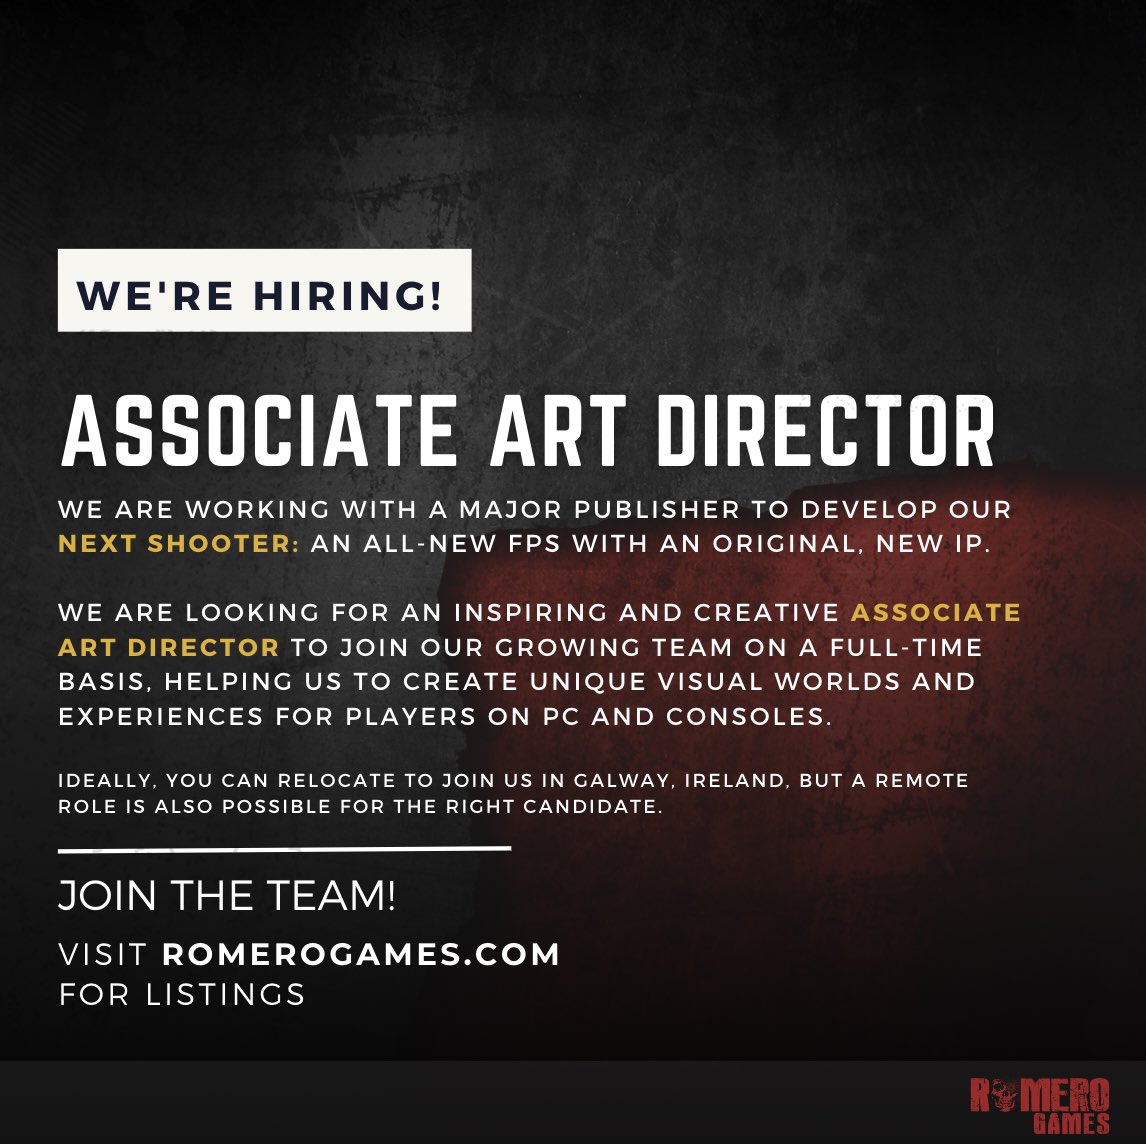 WE’RE HIRING! ⭐️

We're looking for an Associate Art Director for our upcoming FPS. Join a welcoming and inclusive team of over 60 great game devs. 

#hiring #gamedev #artdirection #gameart #gamejobs